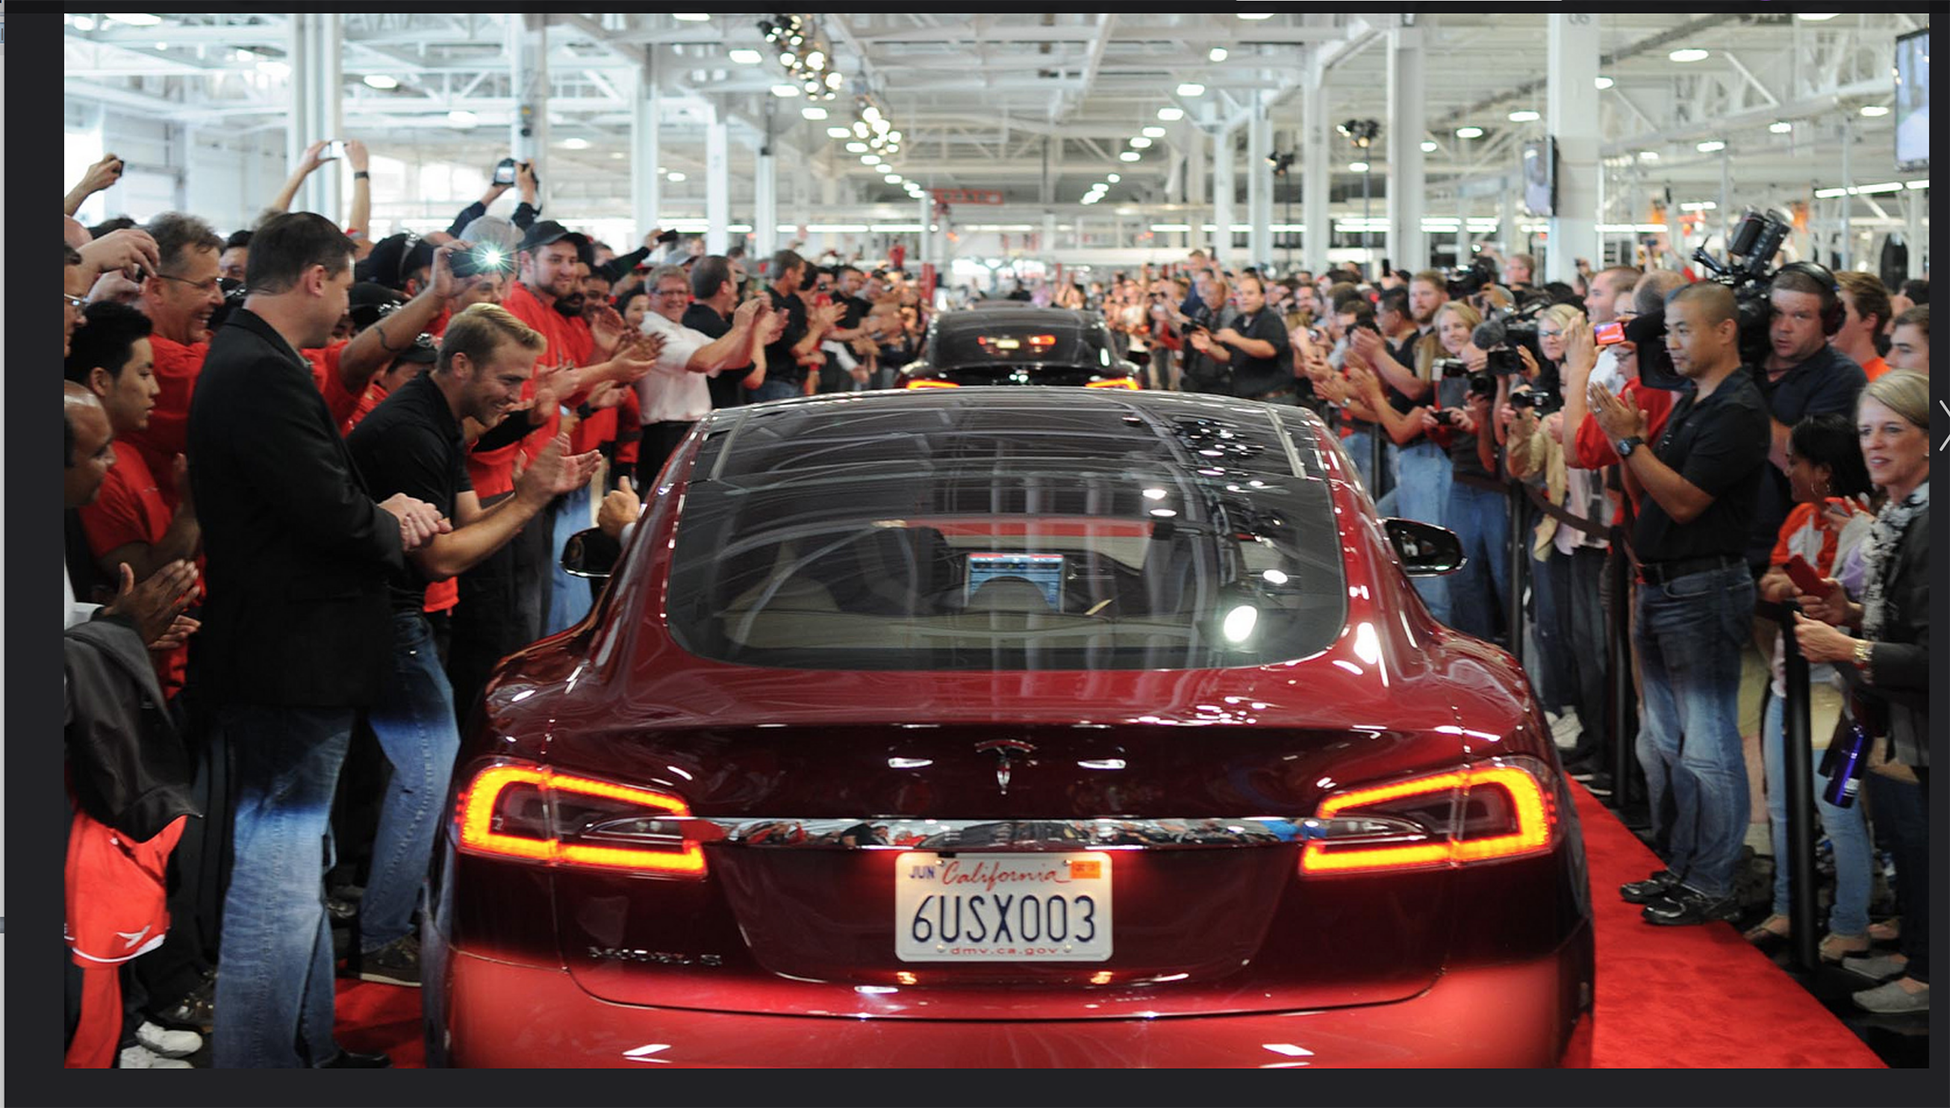 A photograph shows a large crowd cheering on a line of Tesla cars driving down a red carpet path.